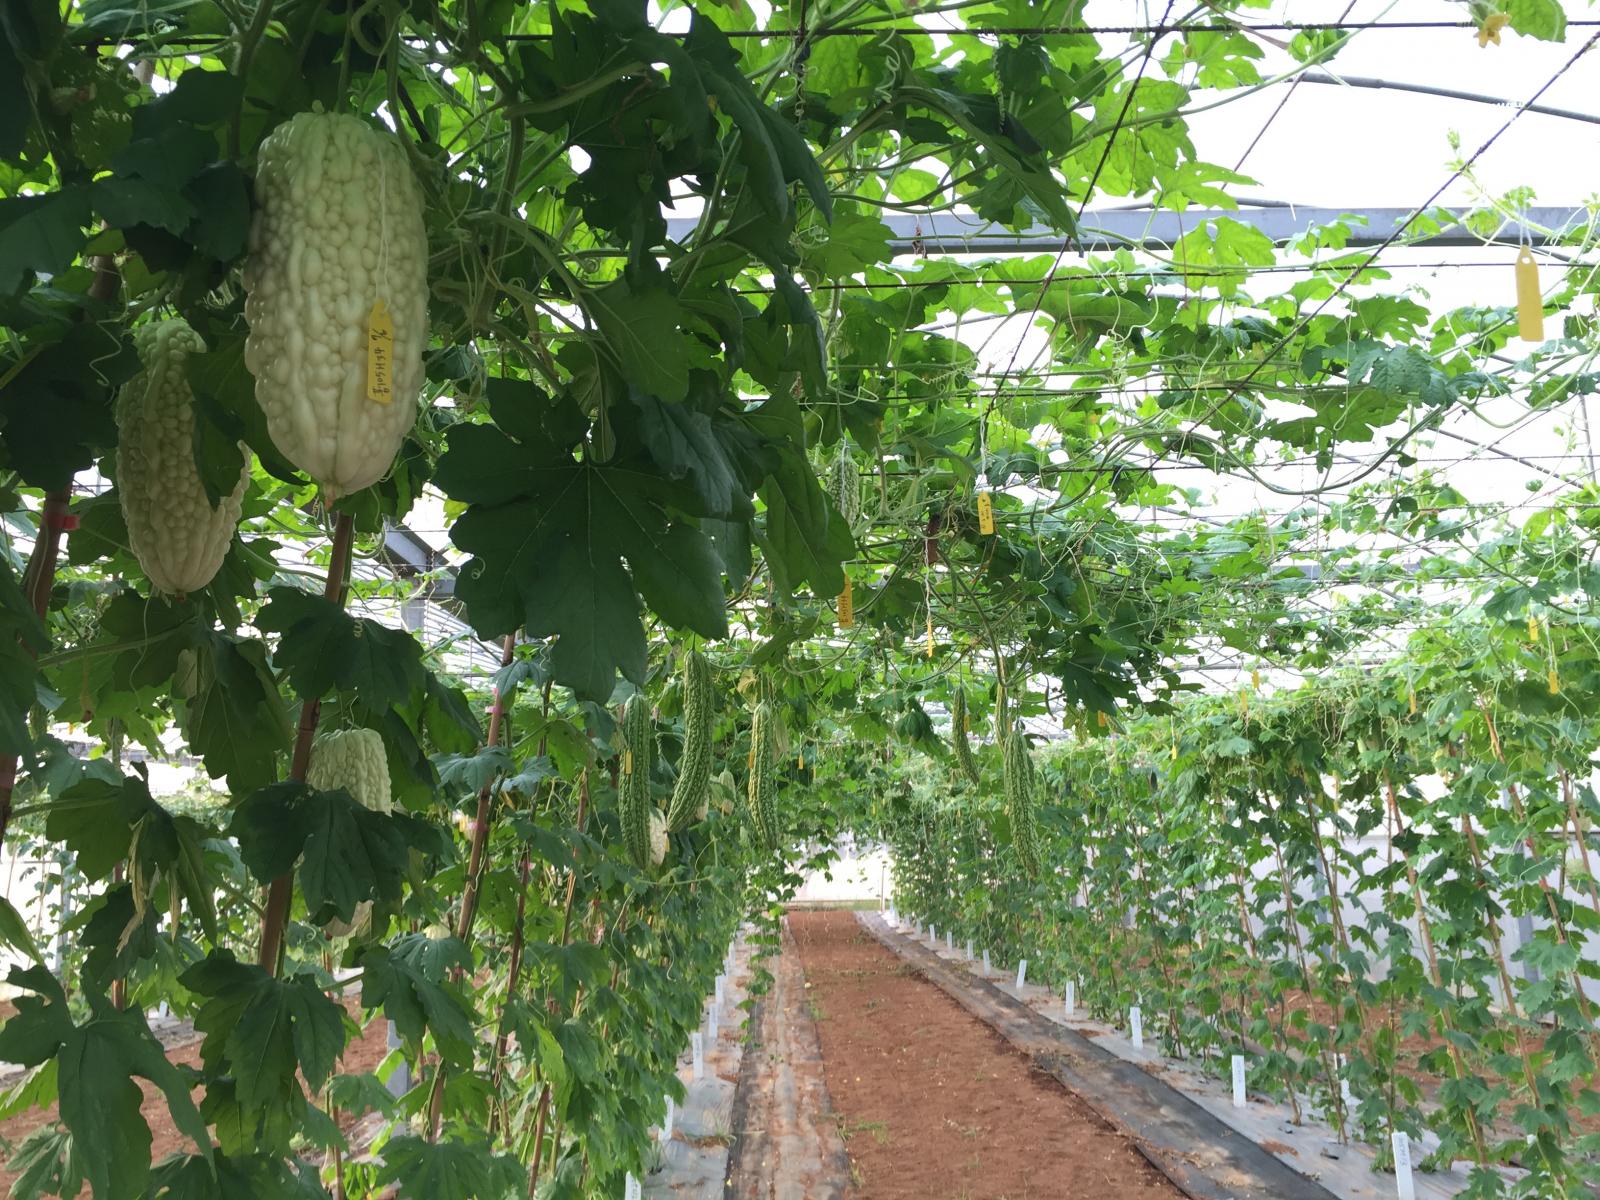 The different lines of bitter gourd cultivated in the green house.